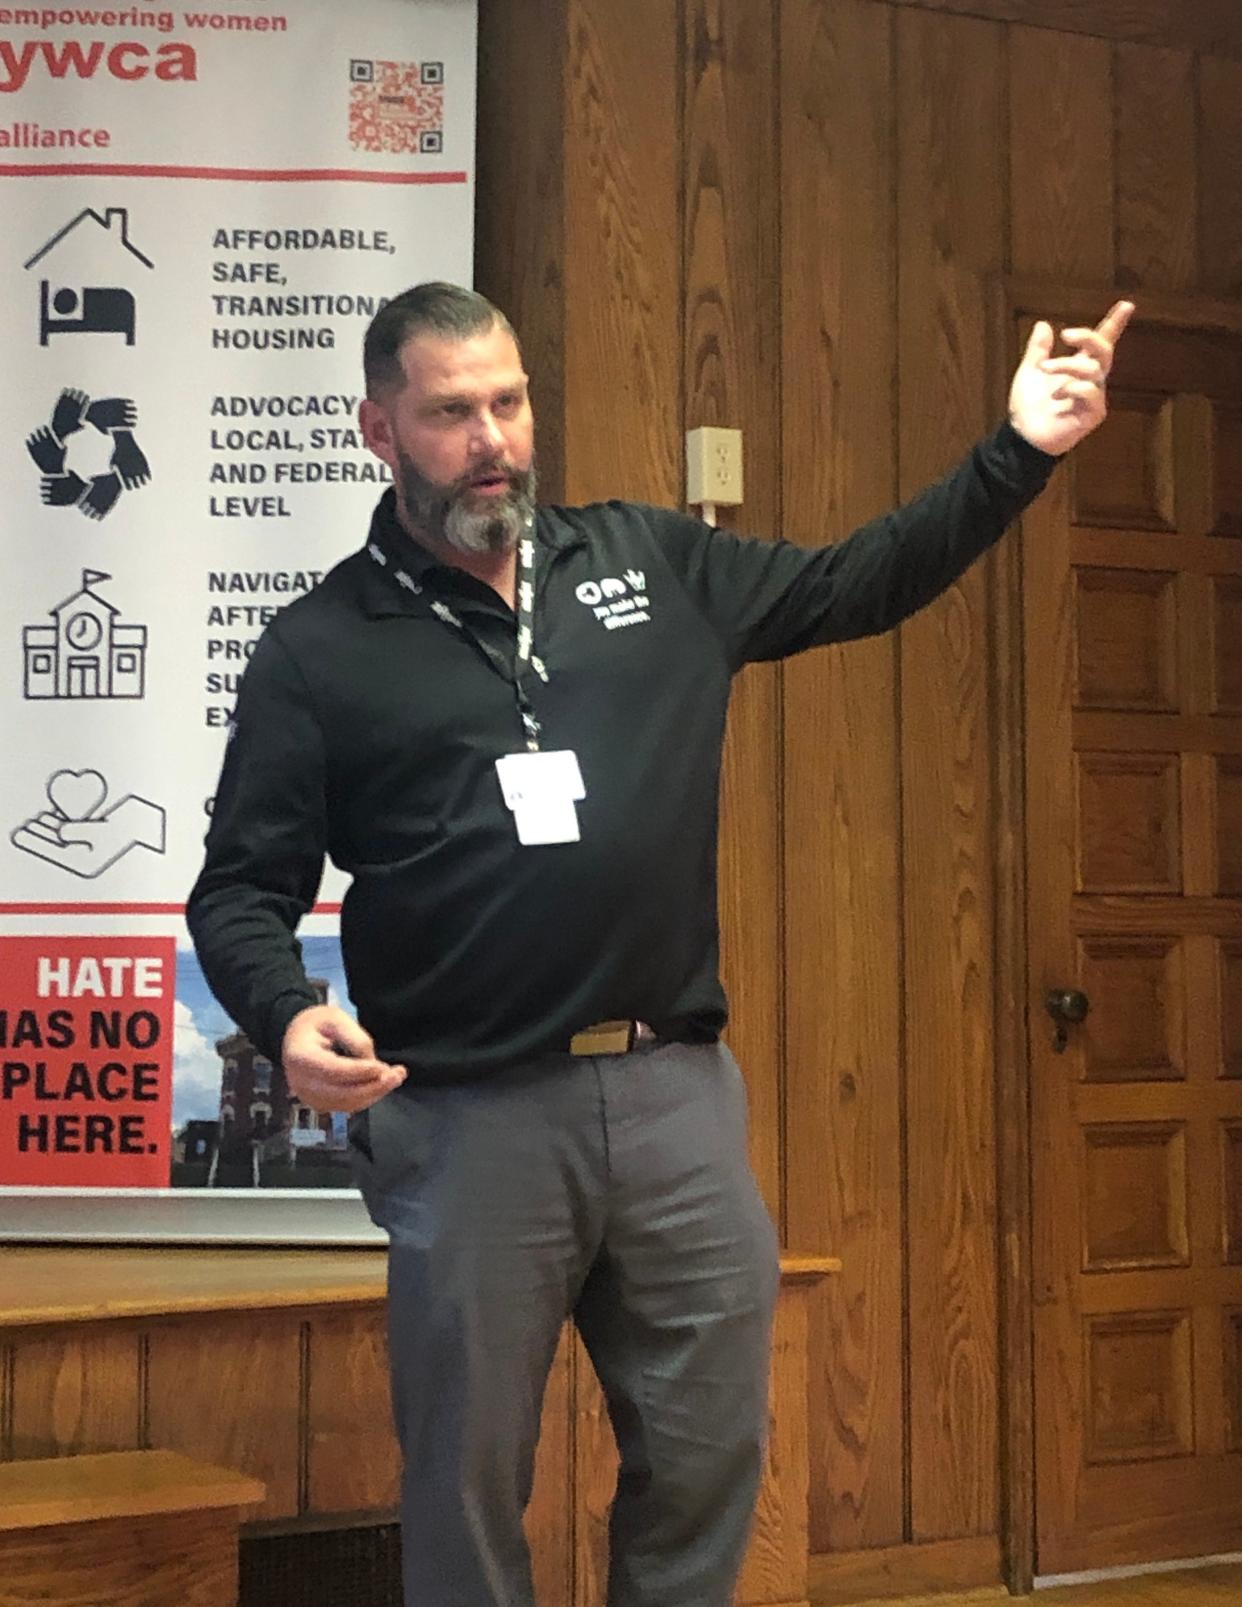 Patrick Hughes, a Boardman native, is the store manager for the new Alliance Meijer location. He spoke at the Kiwanis Club of Alliance luncheon Thursday at the Alliance YWCA.